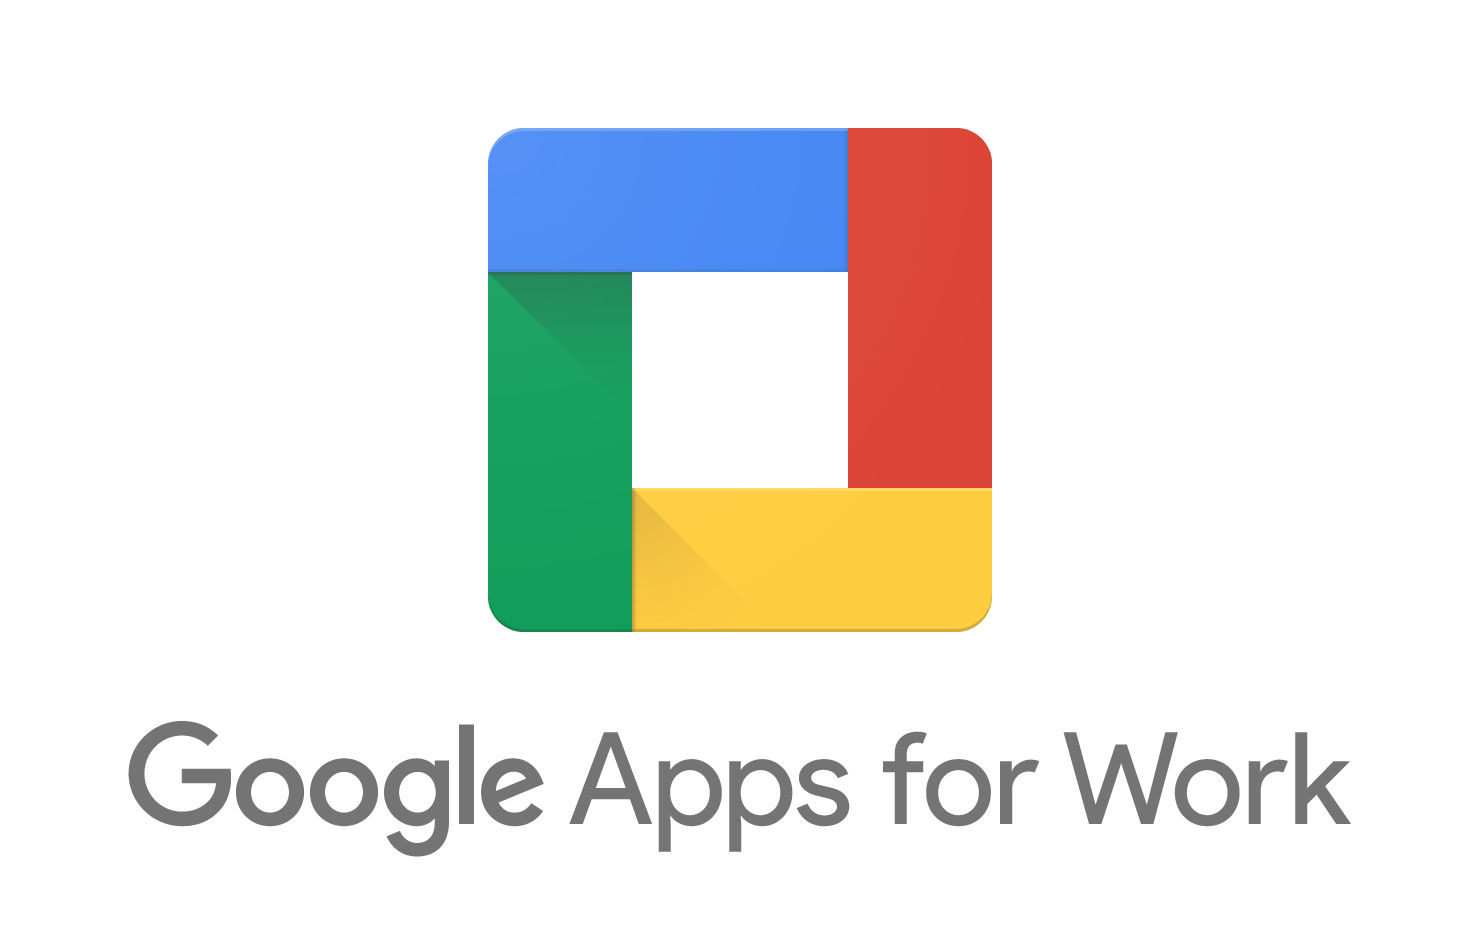 Google Apps Logo - These are the Core Google Apps